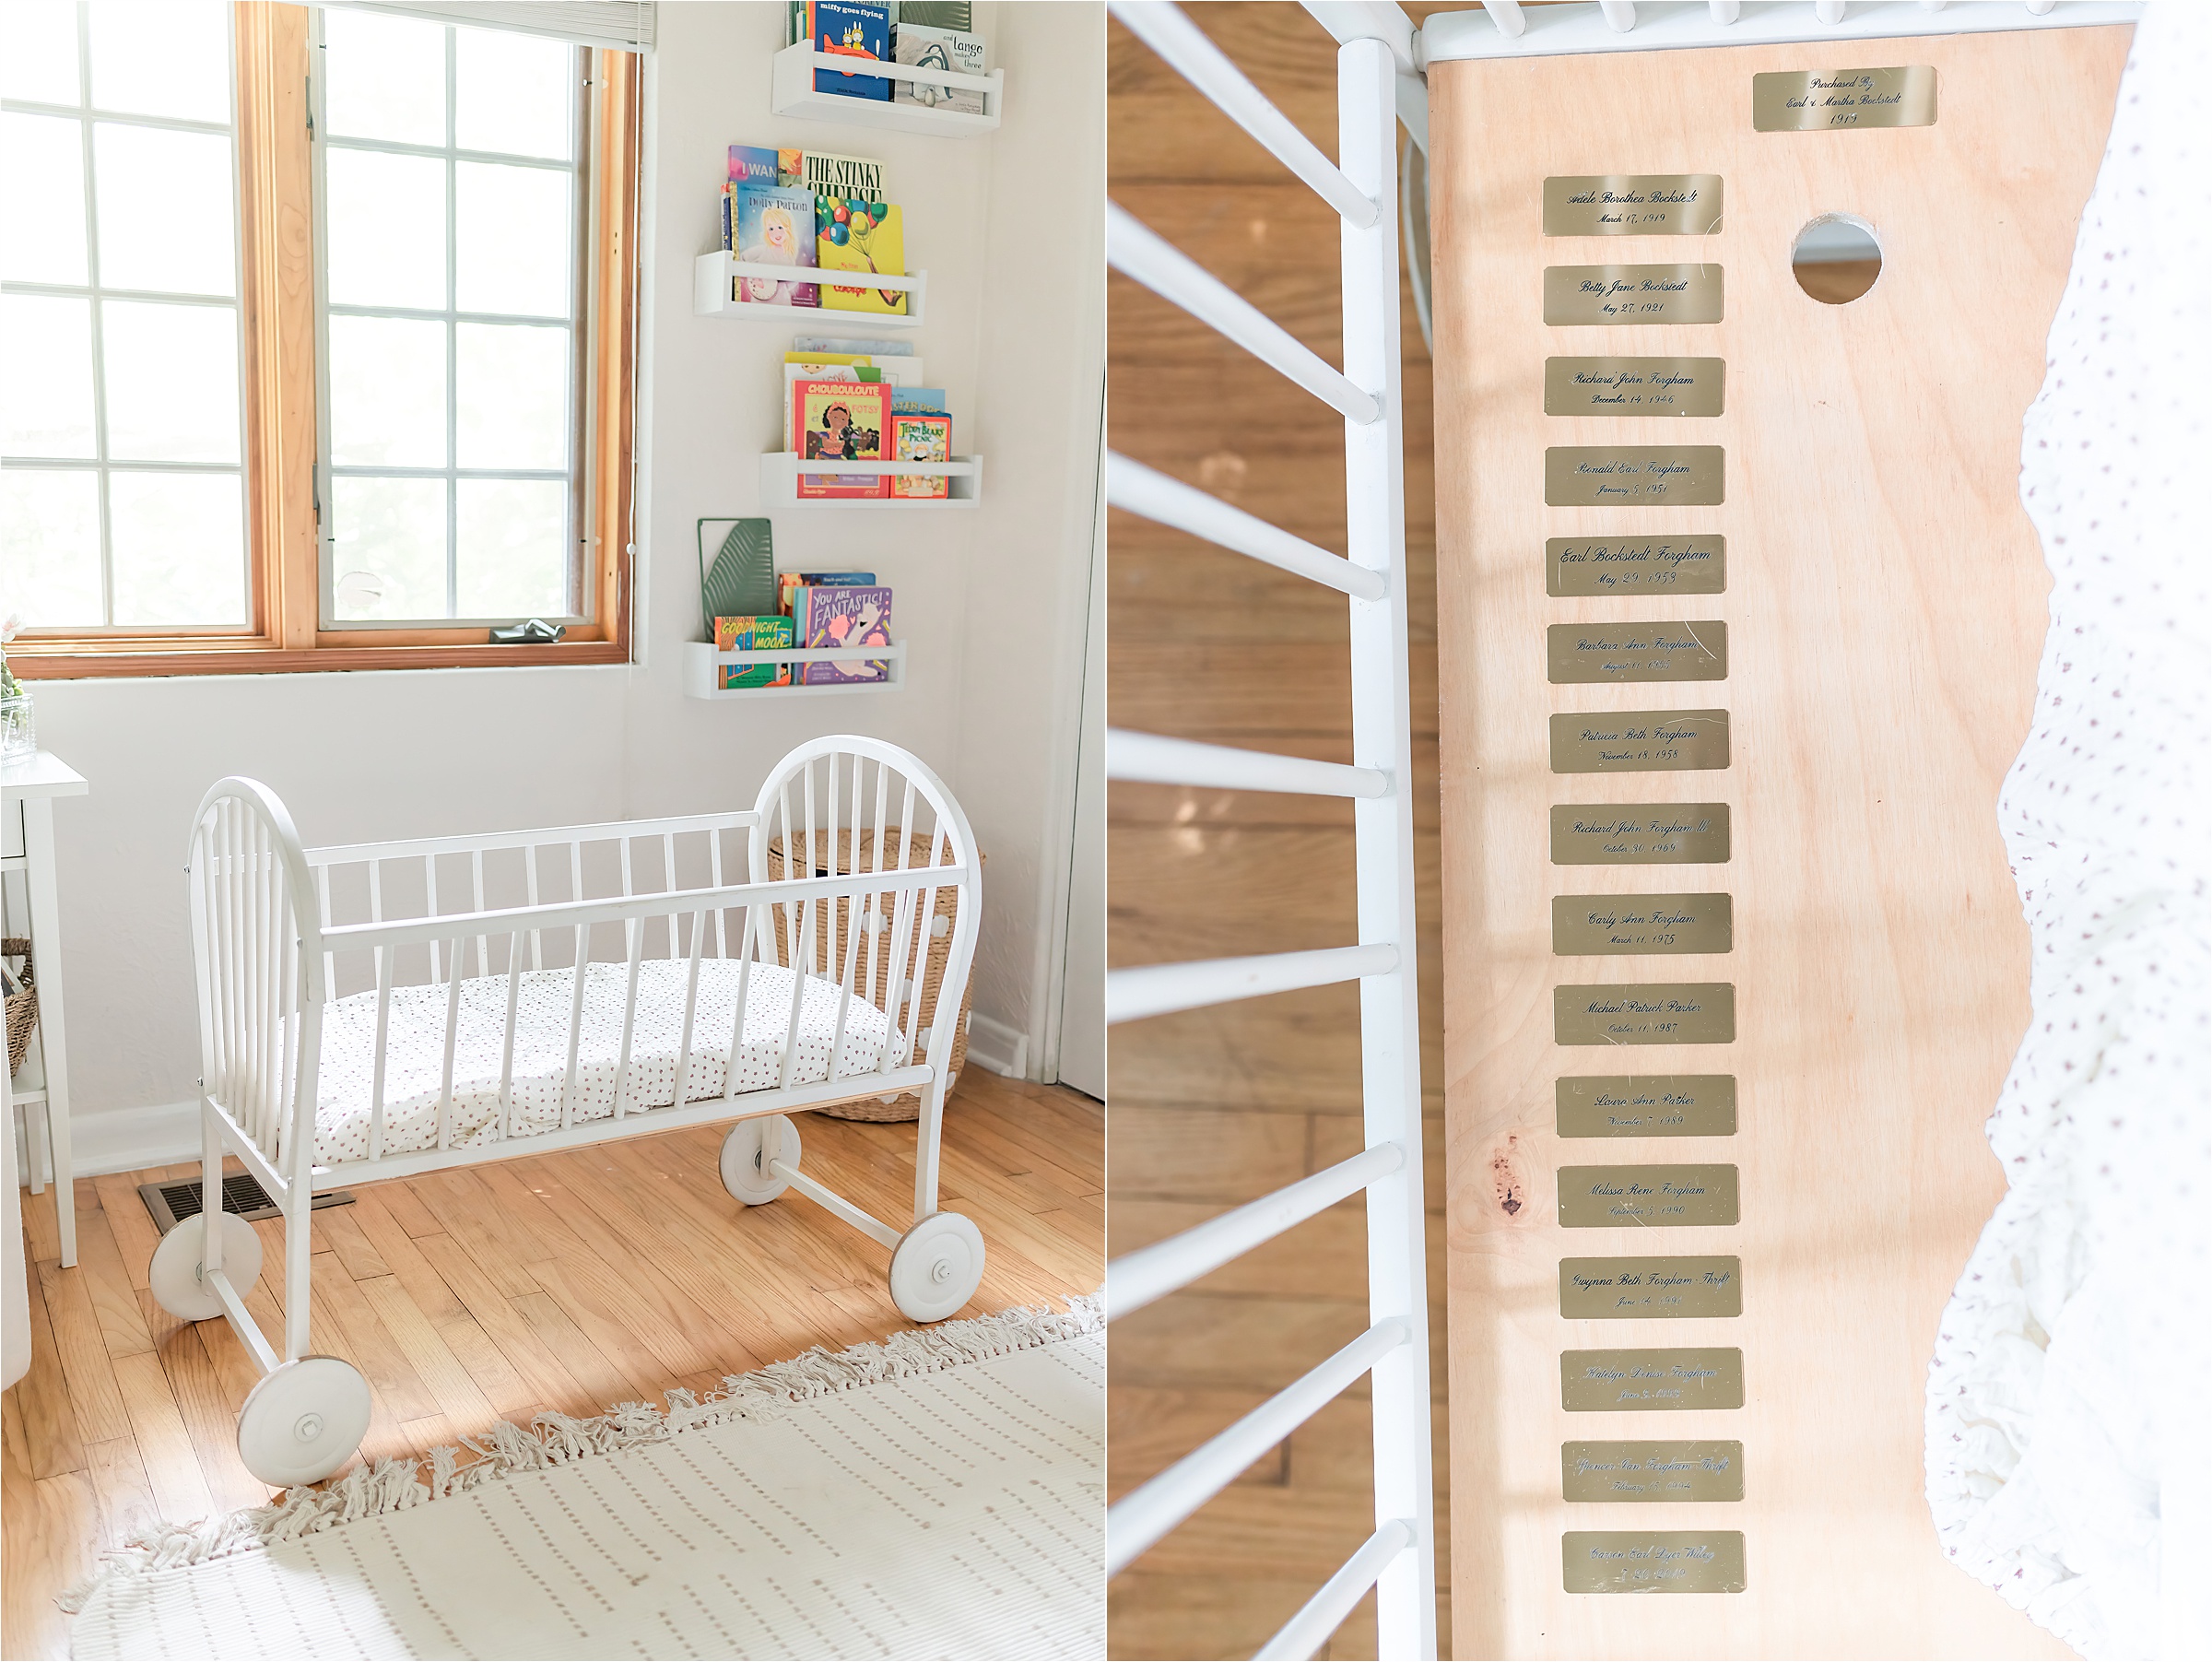 Hand me down bassinet used for over 100 years | Lifestyle Newborn Photography